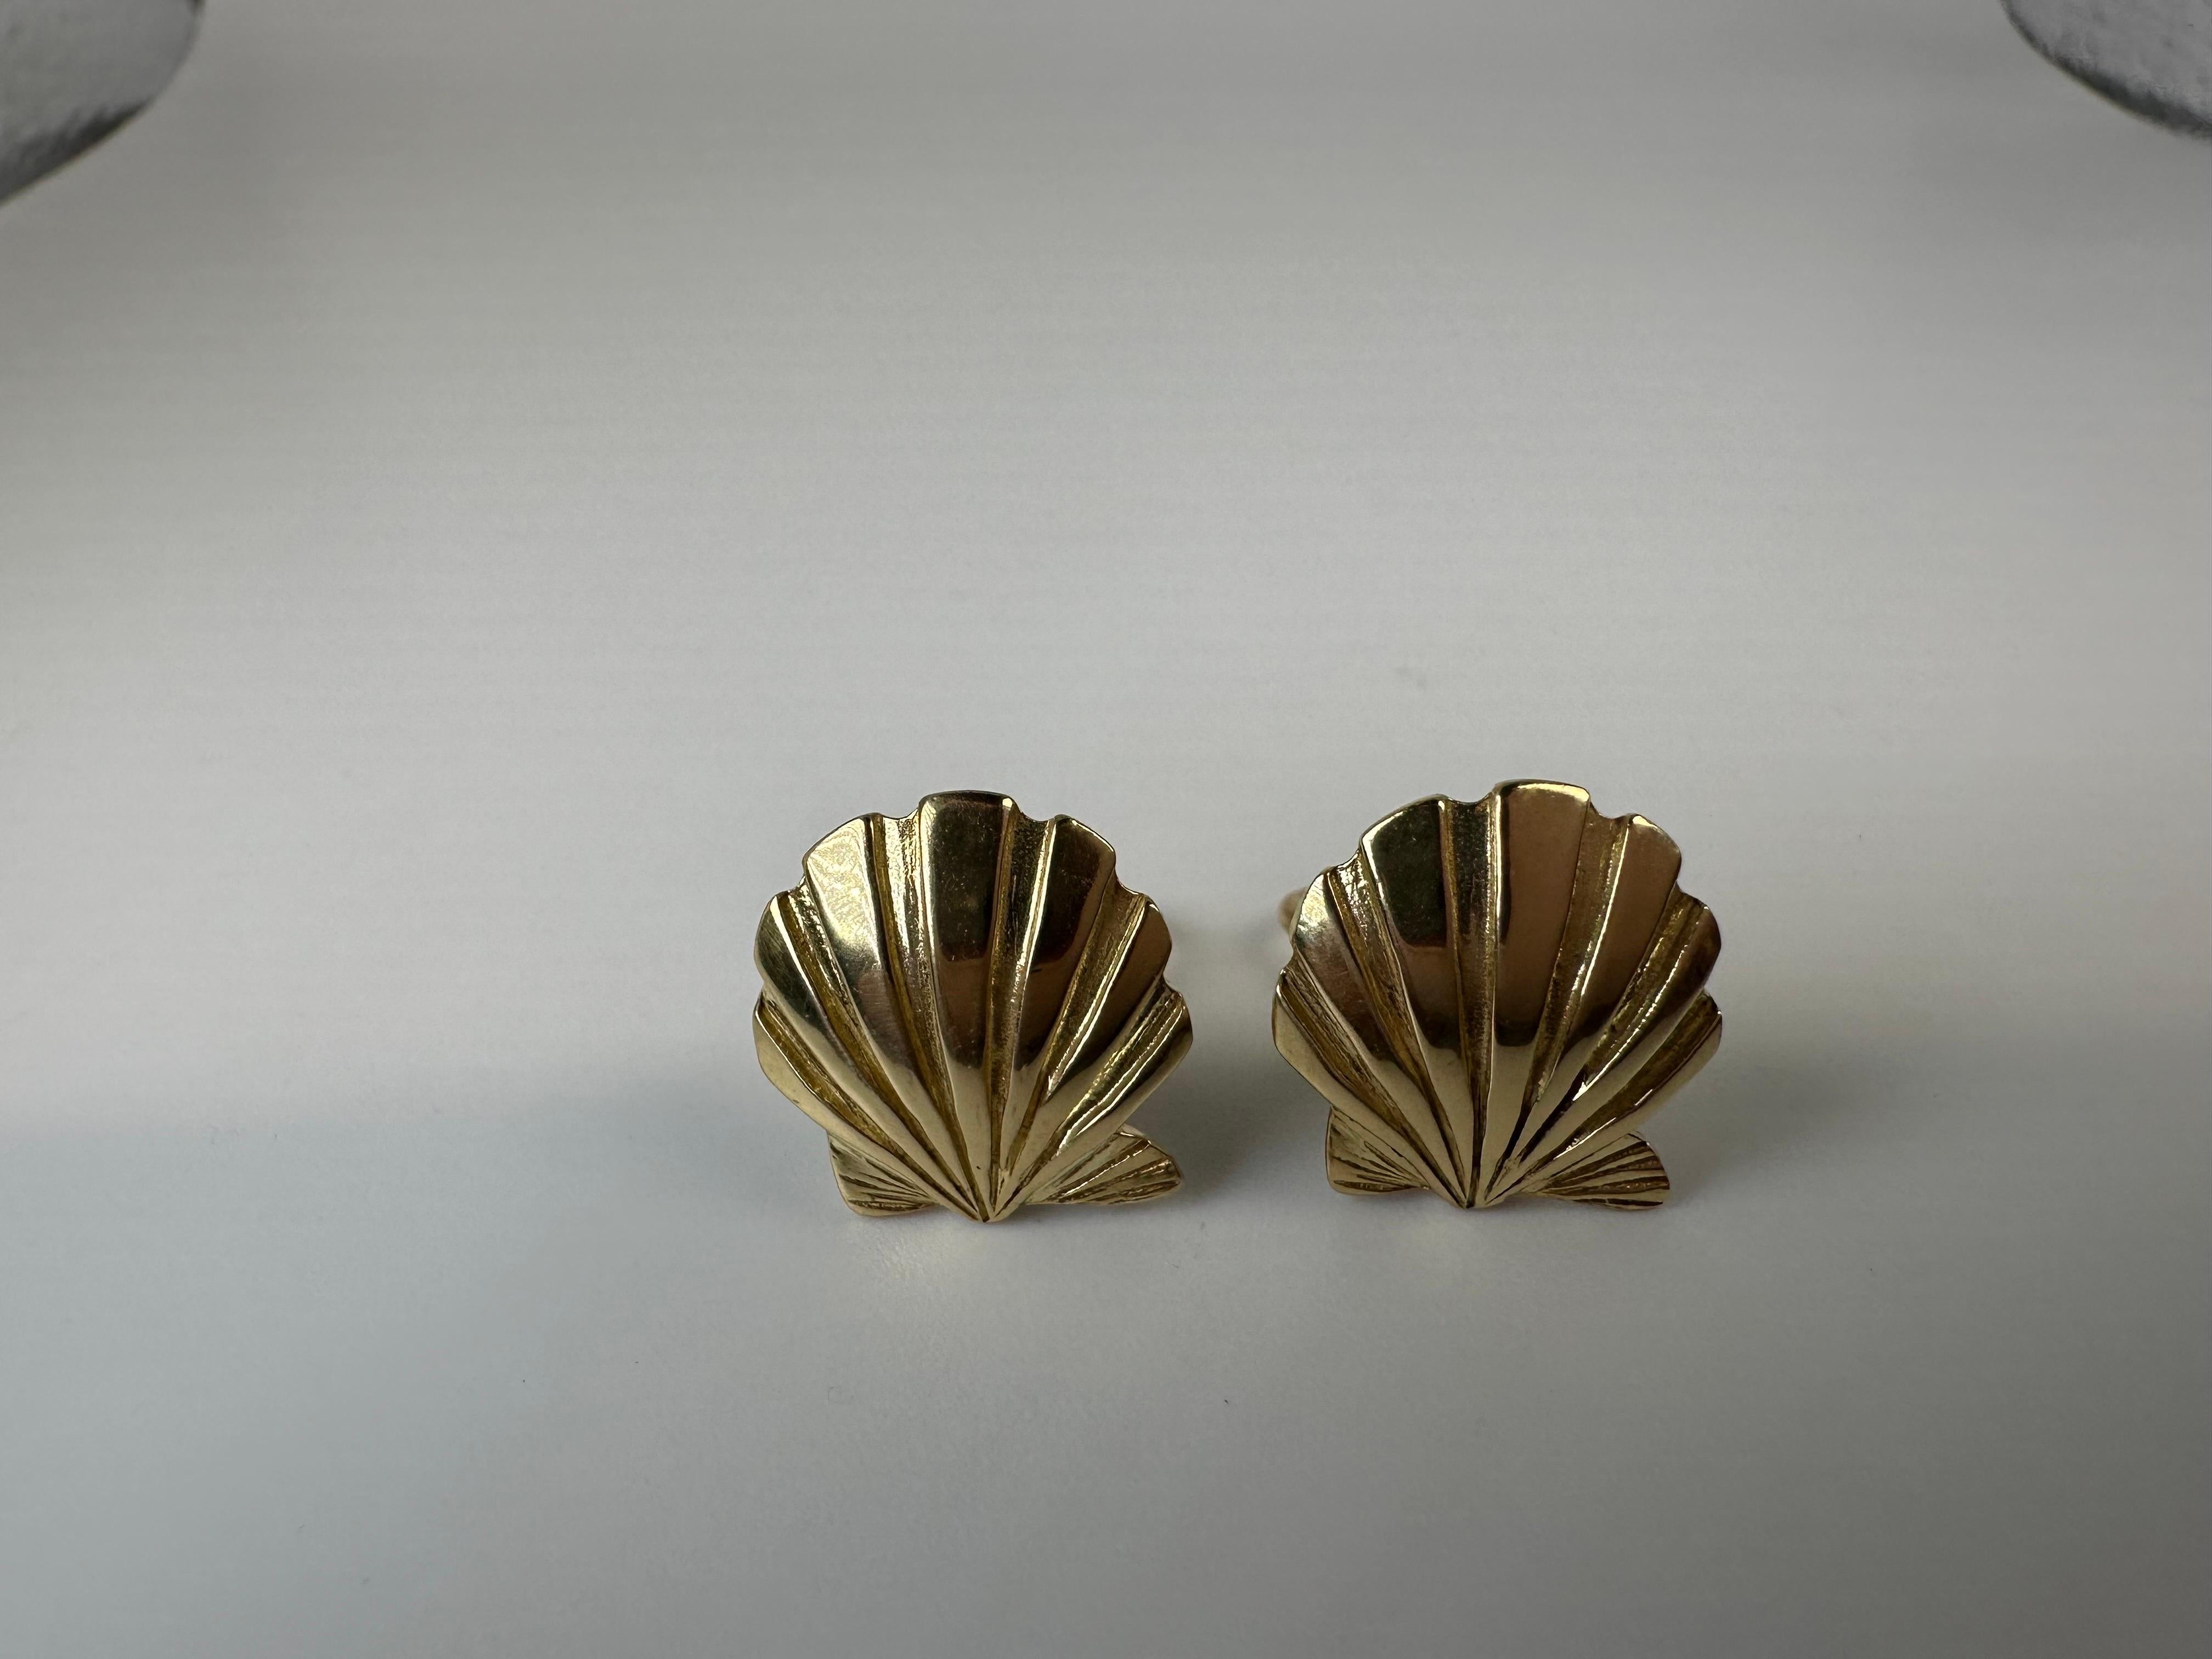 Cute shell earrings in 14KT yellow gold. Carved to perfection and a nice size for everyday wear!

GOLD: 14KT gold
Grams:7.29
Item: 42500037apf

WHAT YOU GET AT STAMPAR JEWELERS:
Stampar Jewelers, located in the heart of Jupiter, Florida, is a custom